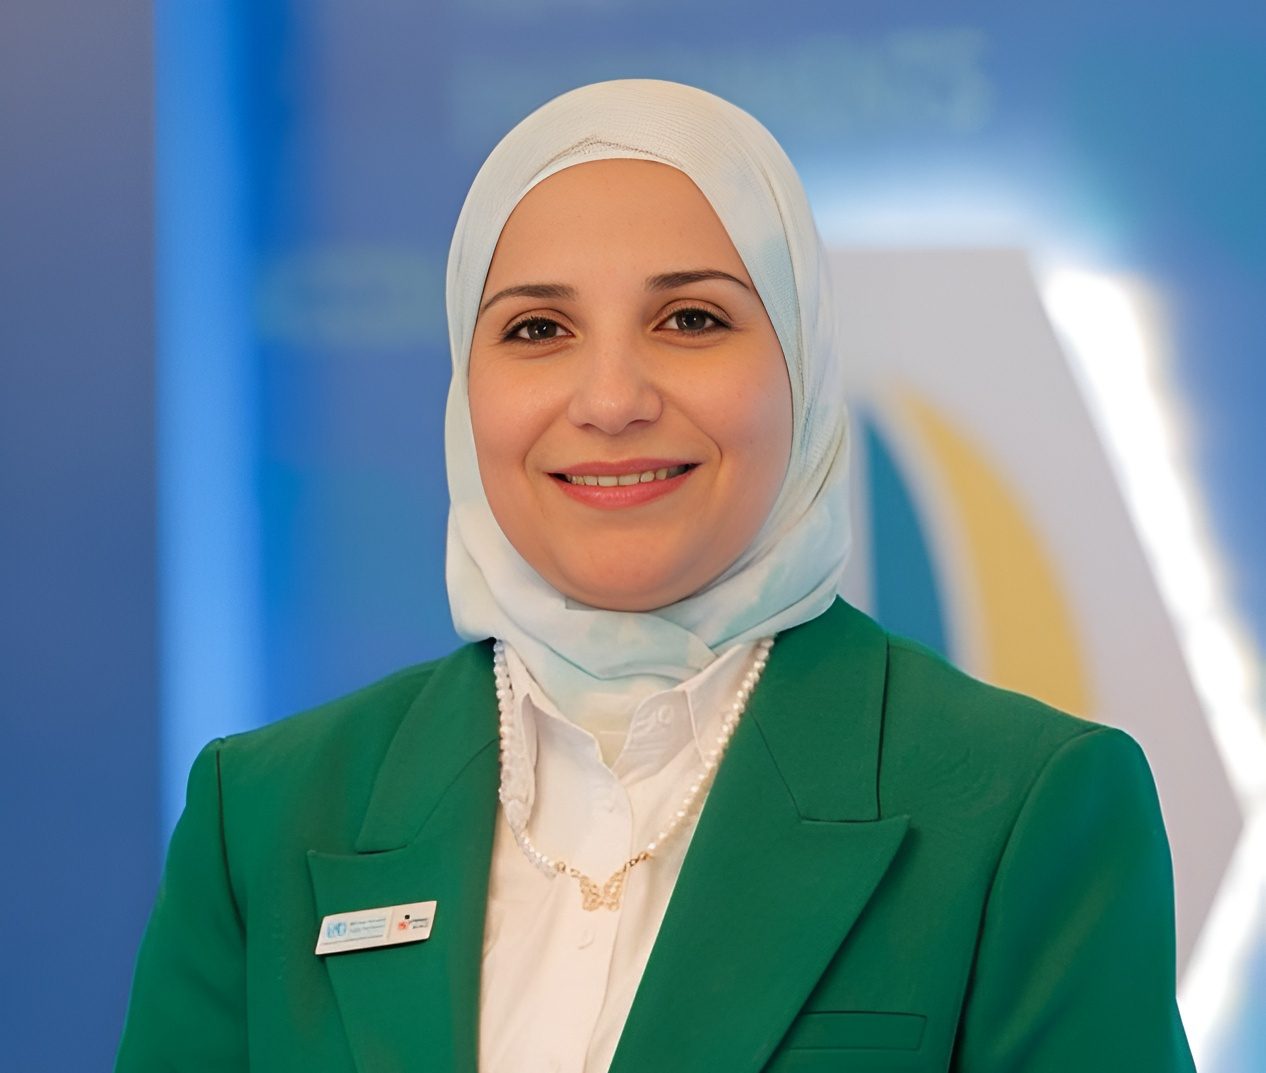 Tasnim Atatrah: Health Diplomacy and cooperation in the Region will reach new heights this week at the 70th session of the WHO Regional Committee for the Eastern Mediterranean.